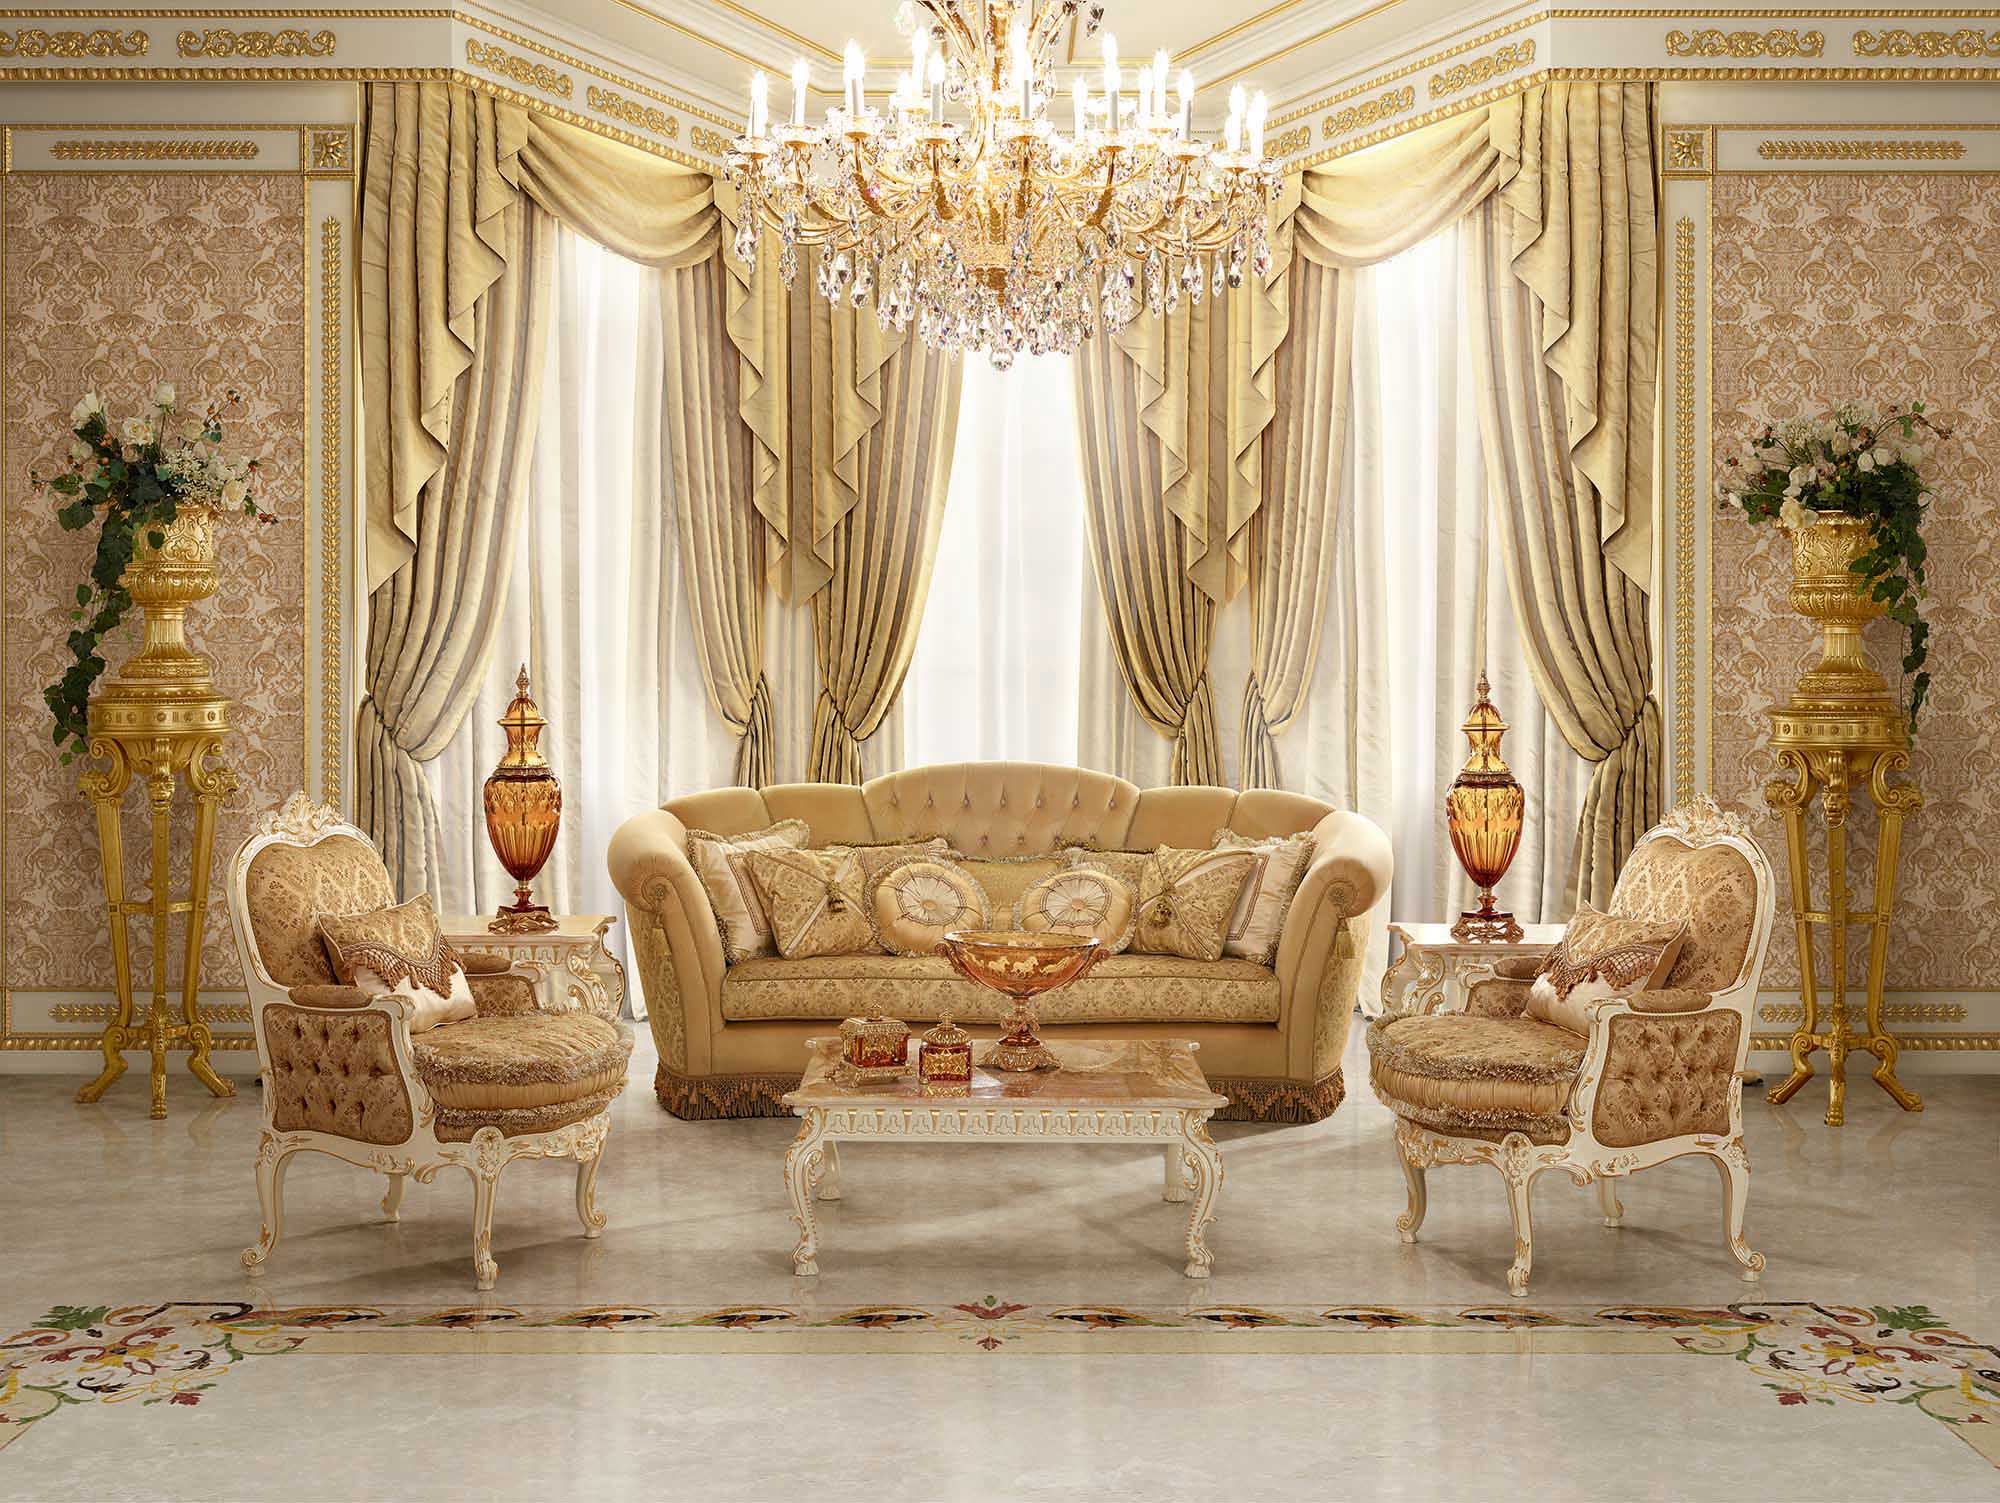 How to Integrate Italian Elegance into Your Living Room